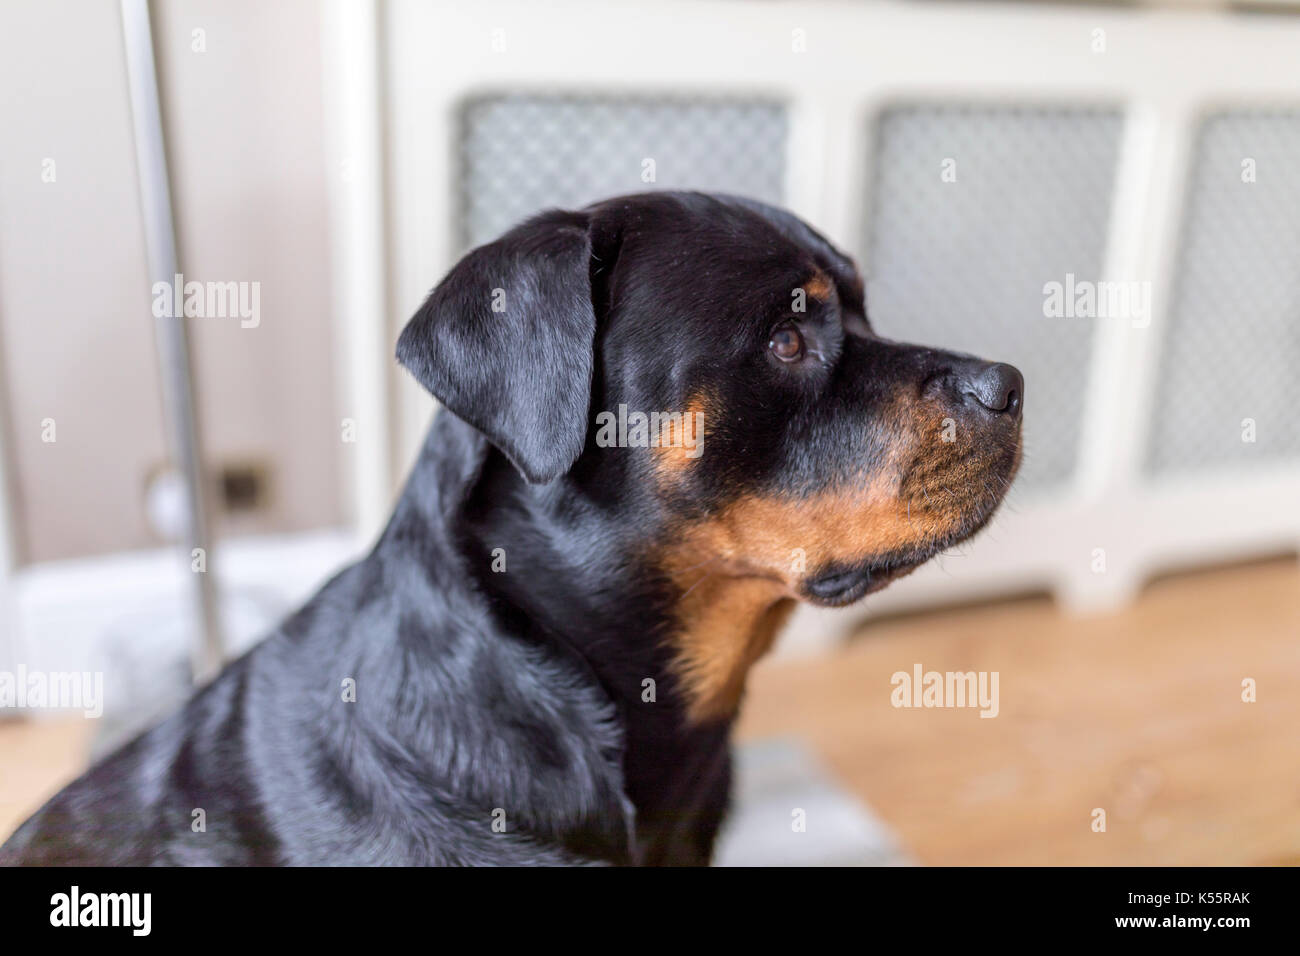 Adorable Rottweiller side profile waiting for a treat Stock Photo